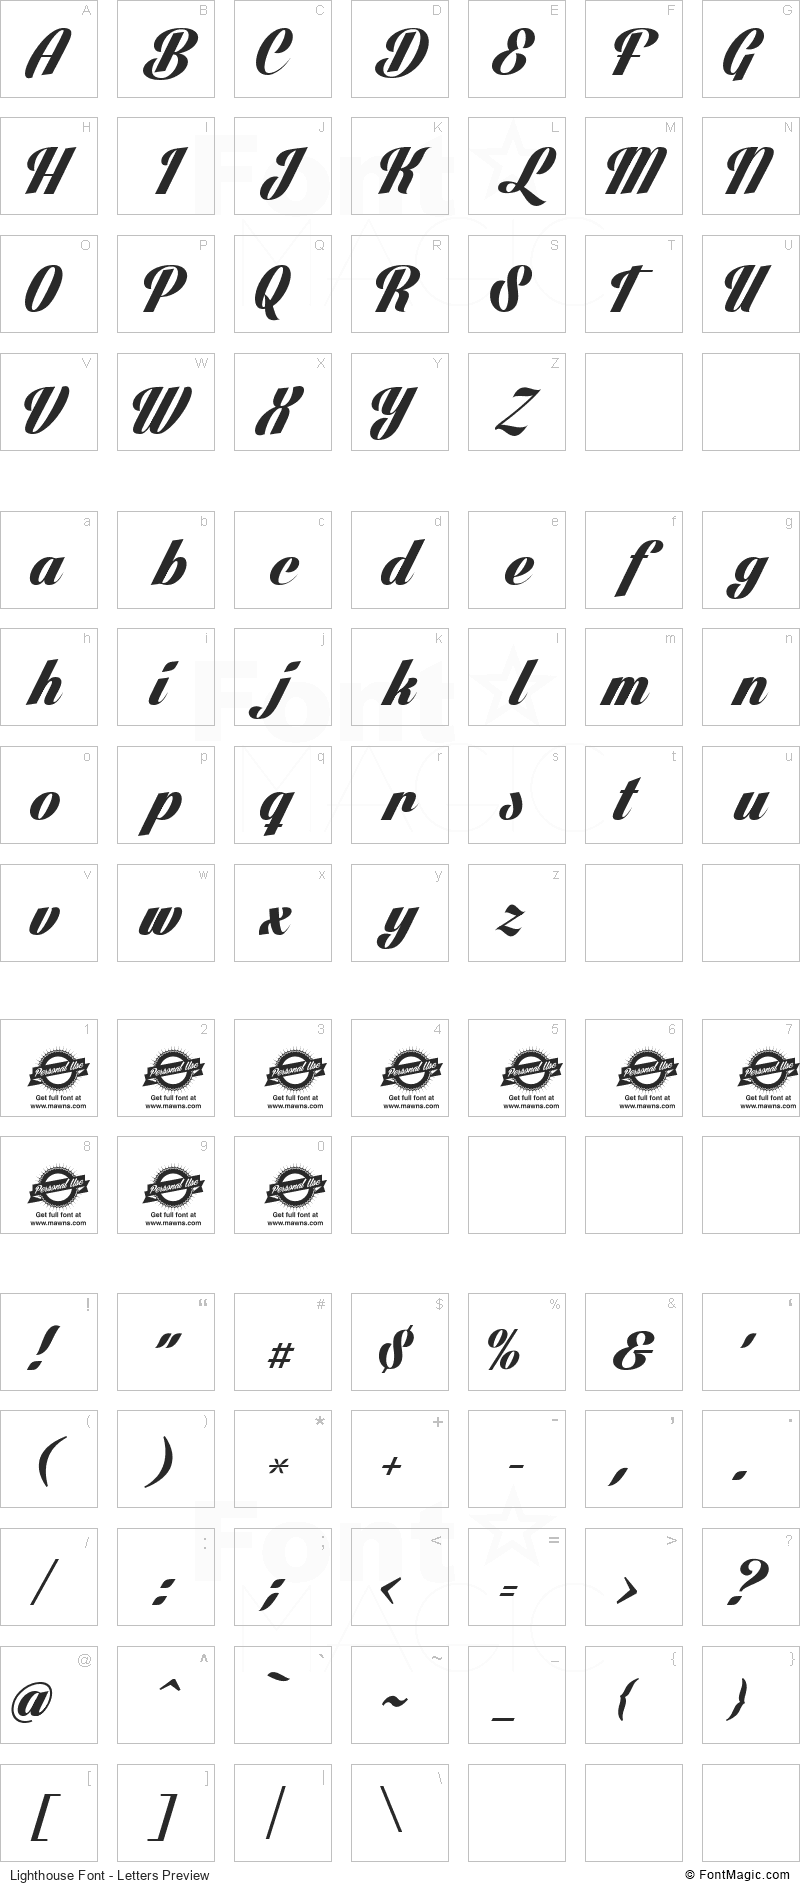 Lighthouse Font - All Latters Preview Chart